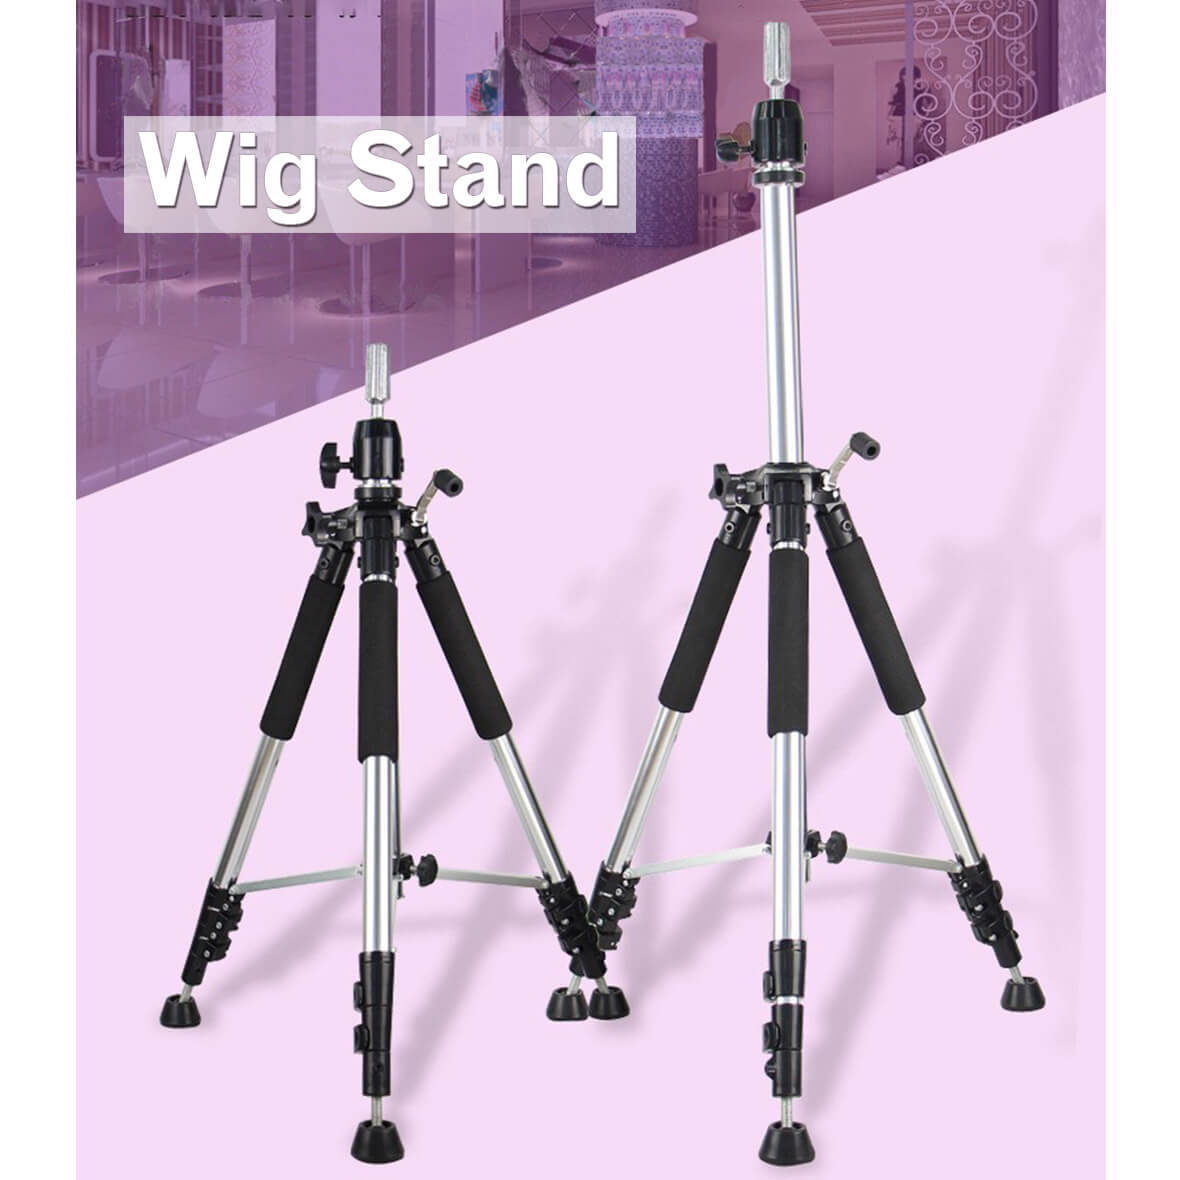 Wig Head Stand - Adjustable Wig Stand Tripod Heavy Duty Wig Stand Metal  Mannequin Head Stand with Tool Tray for Hair Extensions Wig Cosmetology  Hairdr for Sale in Upland, CA - OfferUp